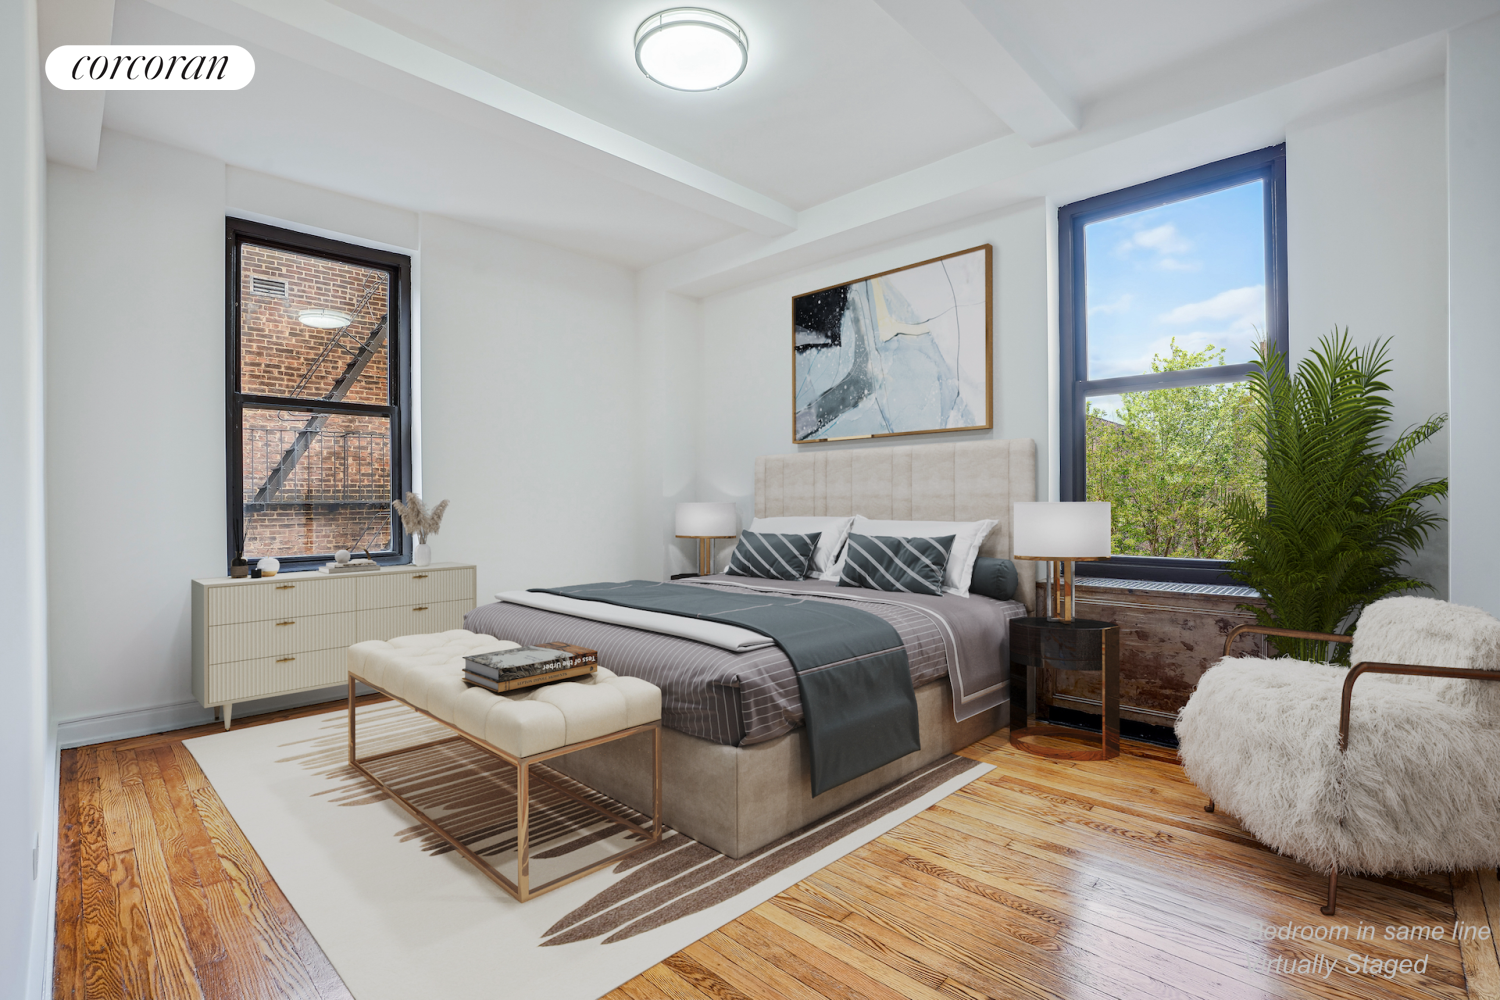 200 West 16th Street 2Ab, Chelsea, Downtown, NYC - 3 Bedrooms  
2 Bathrooms  
6 Rooms - 